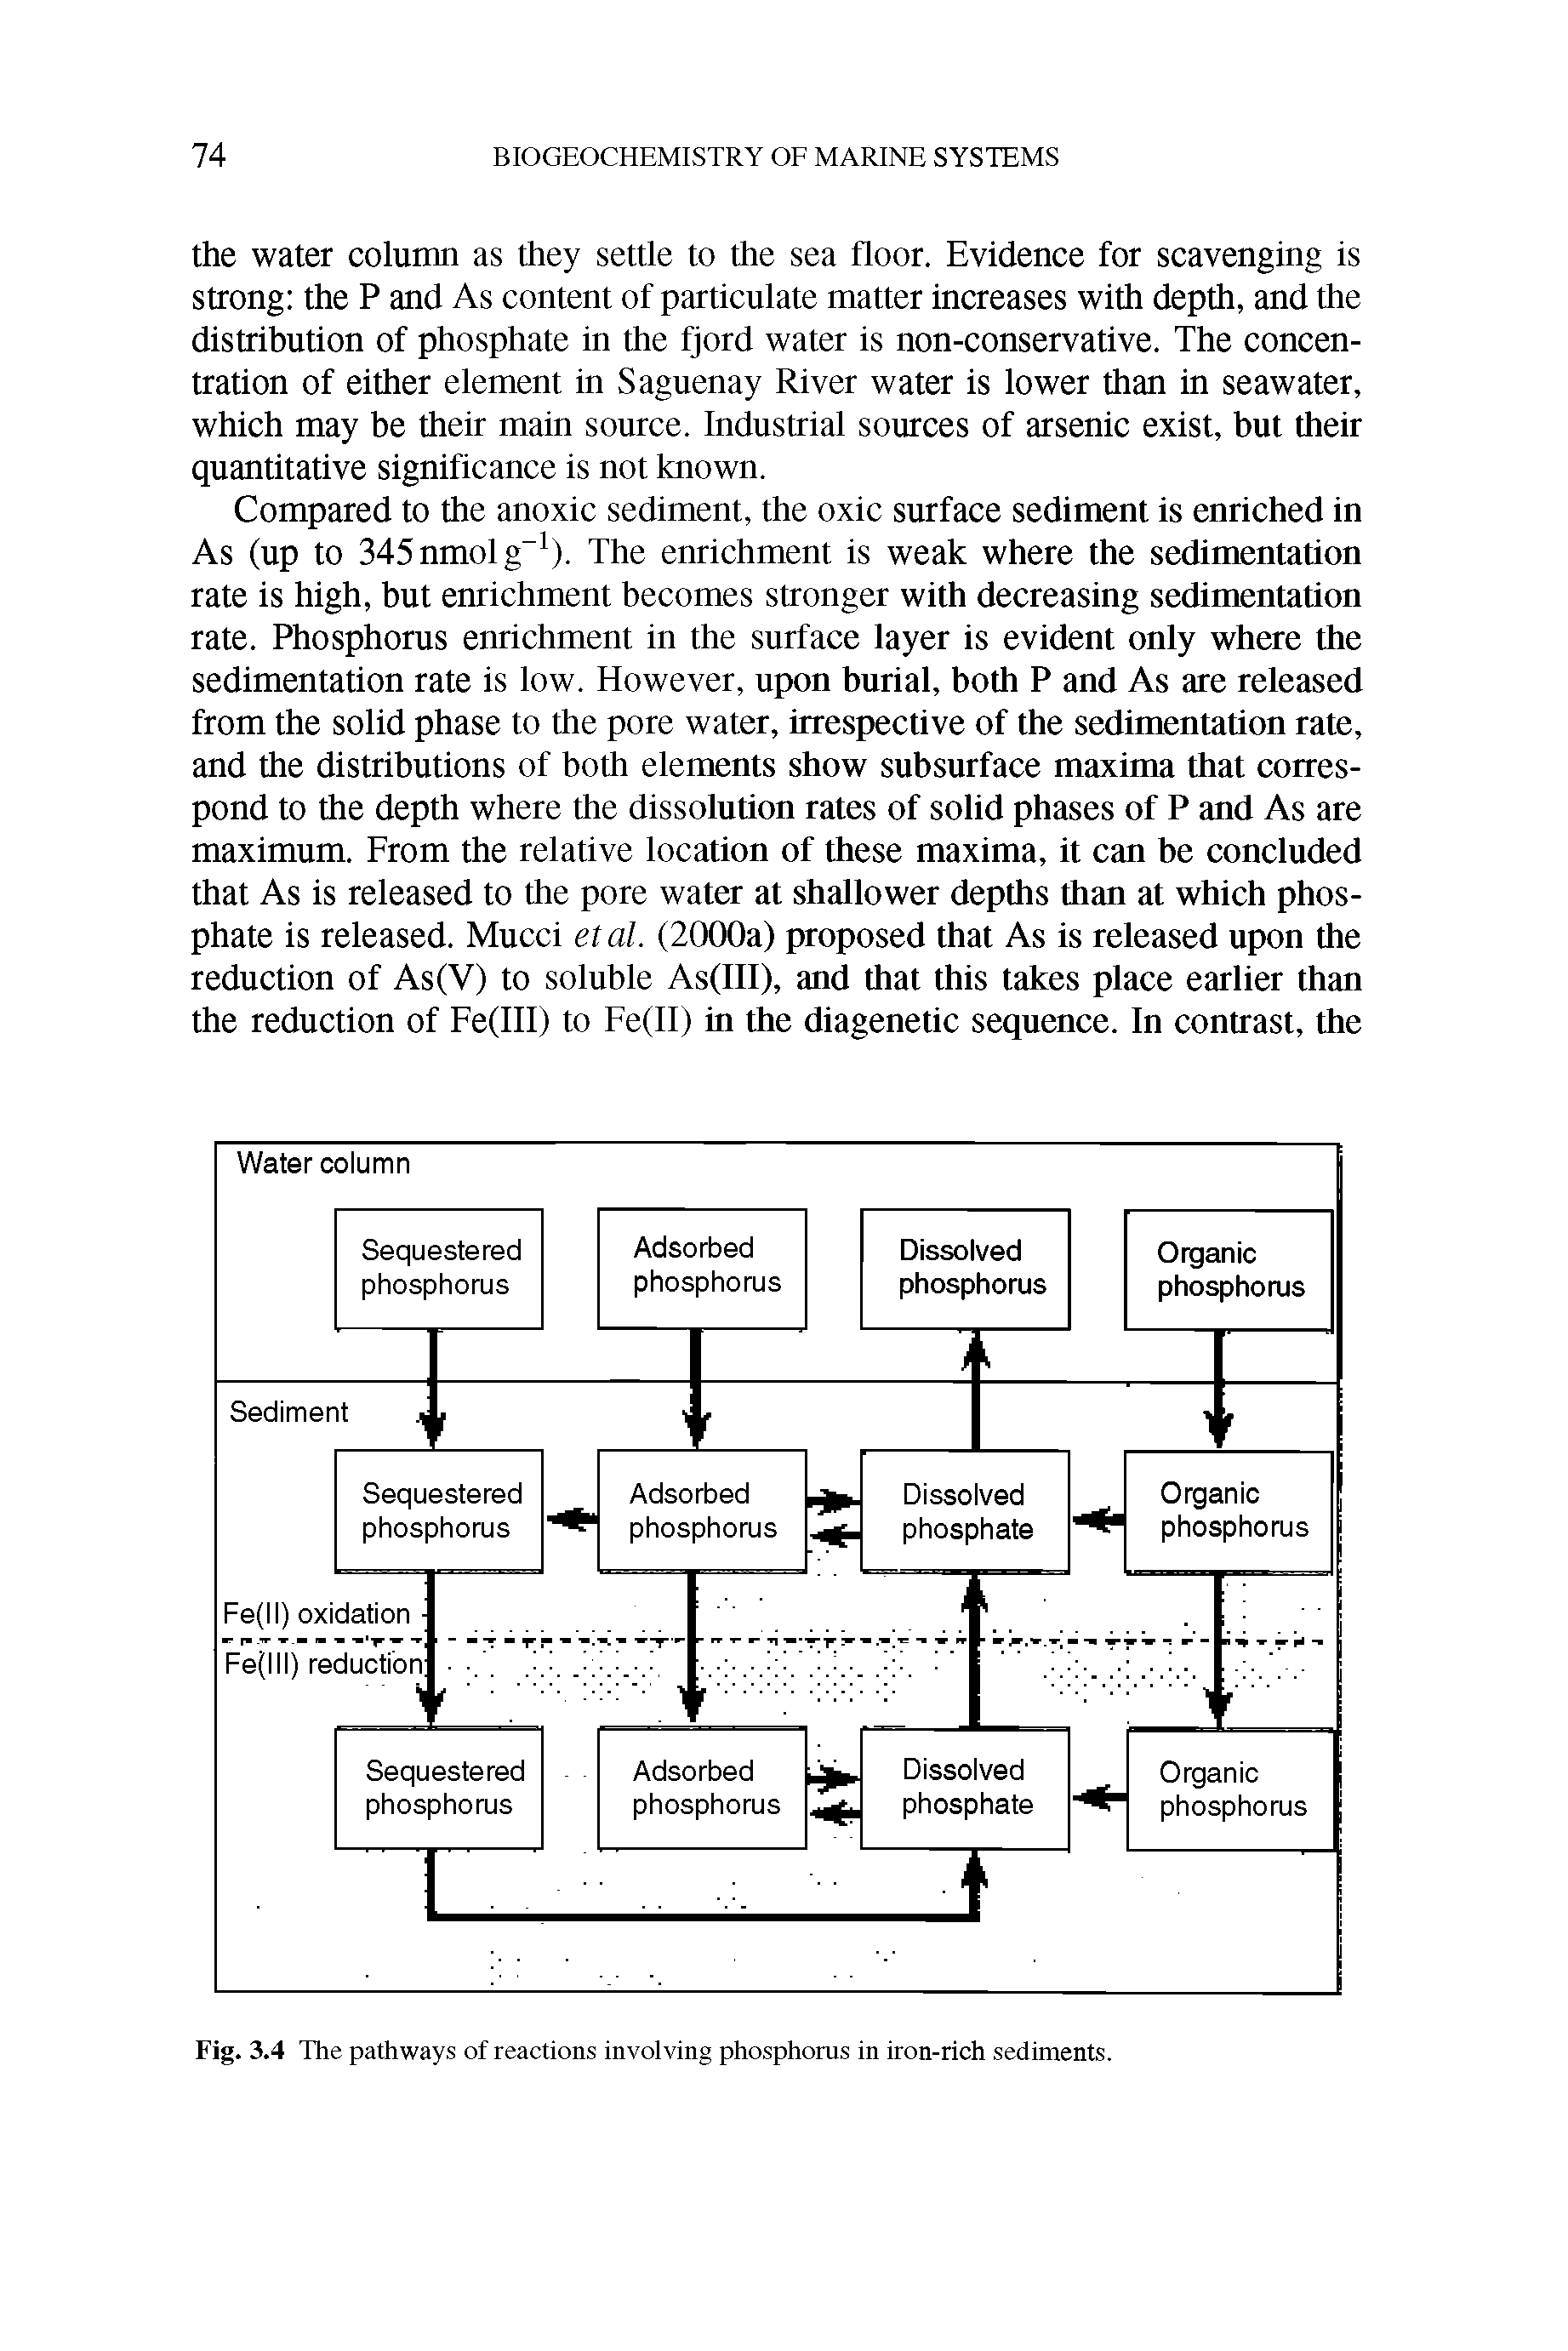 Fig. 3.4 The pathways of reactions involving phosphorus in iron-rich sediments.